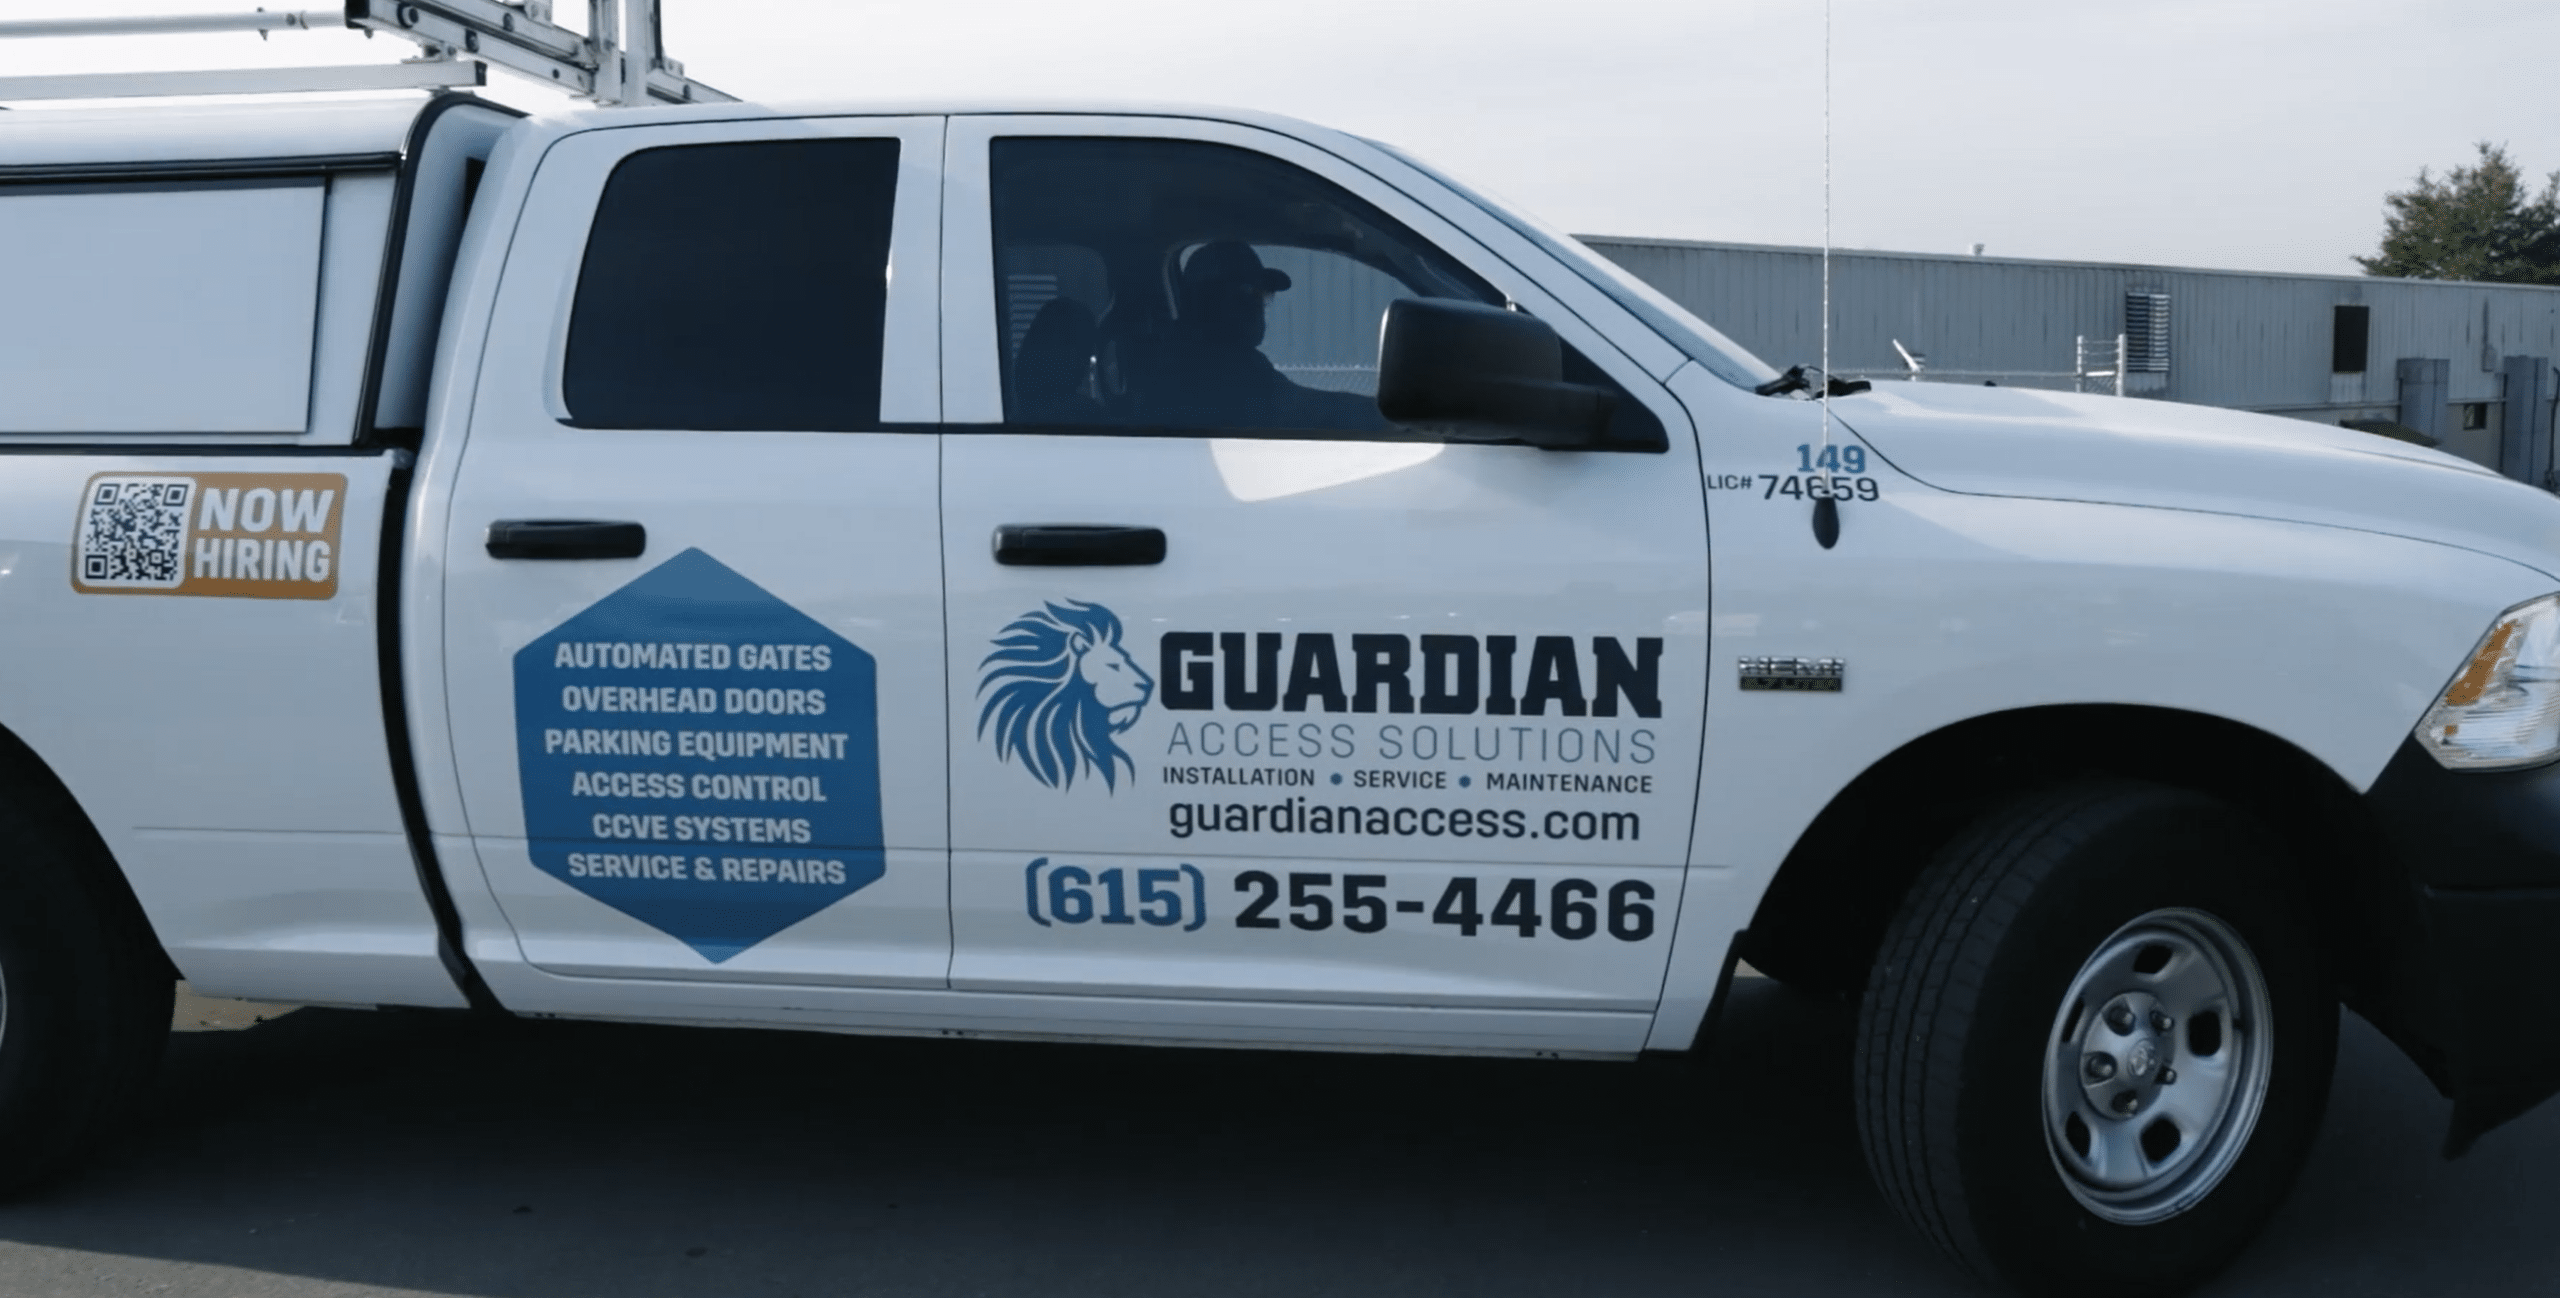 Guardian Access Solutions truck with brand logo and services on the passenger side.